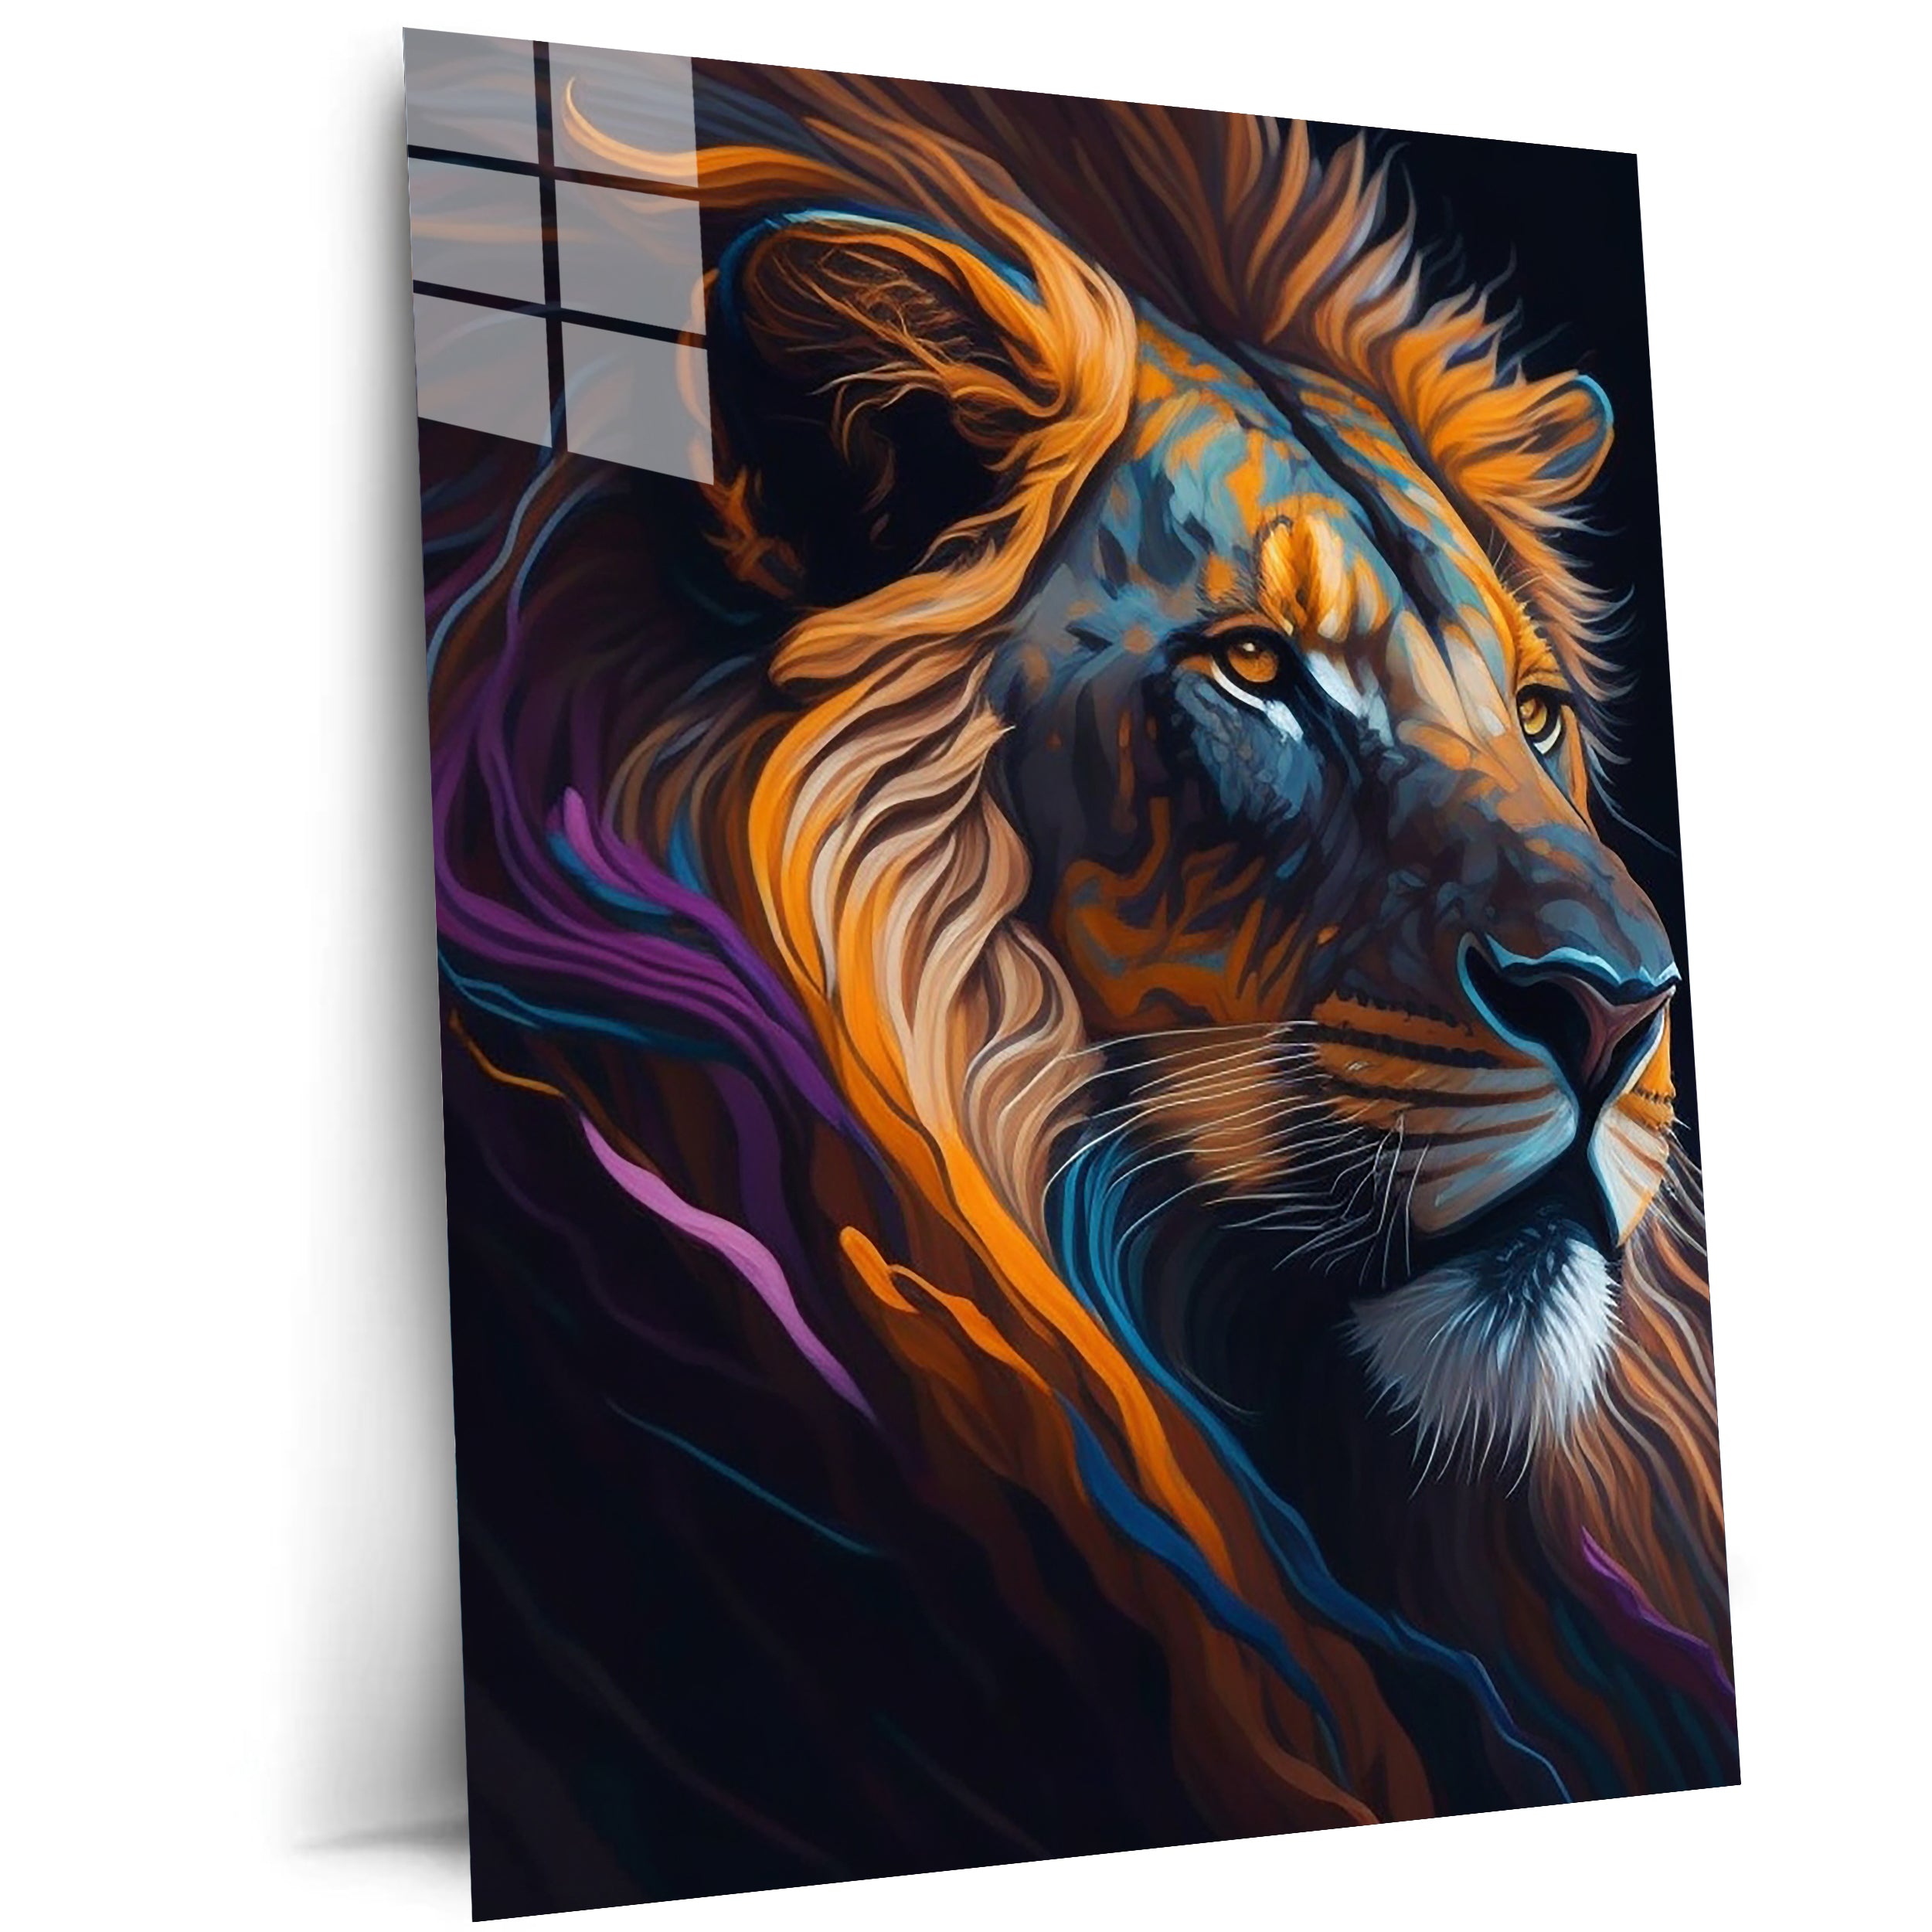 Painted Lion-designed by @AungKhantNaing